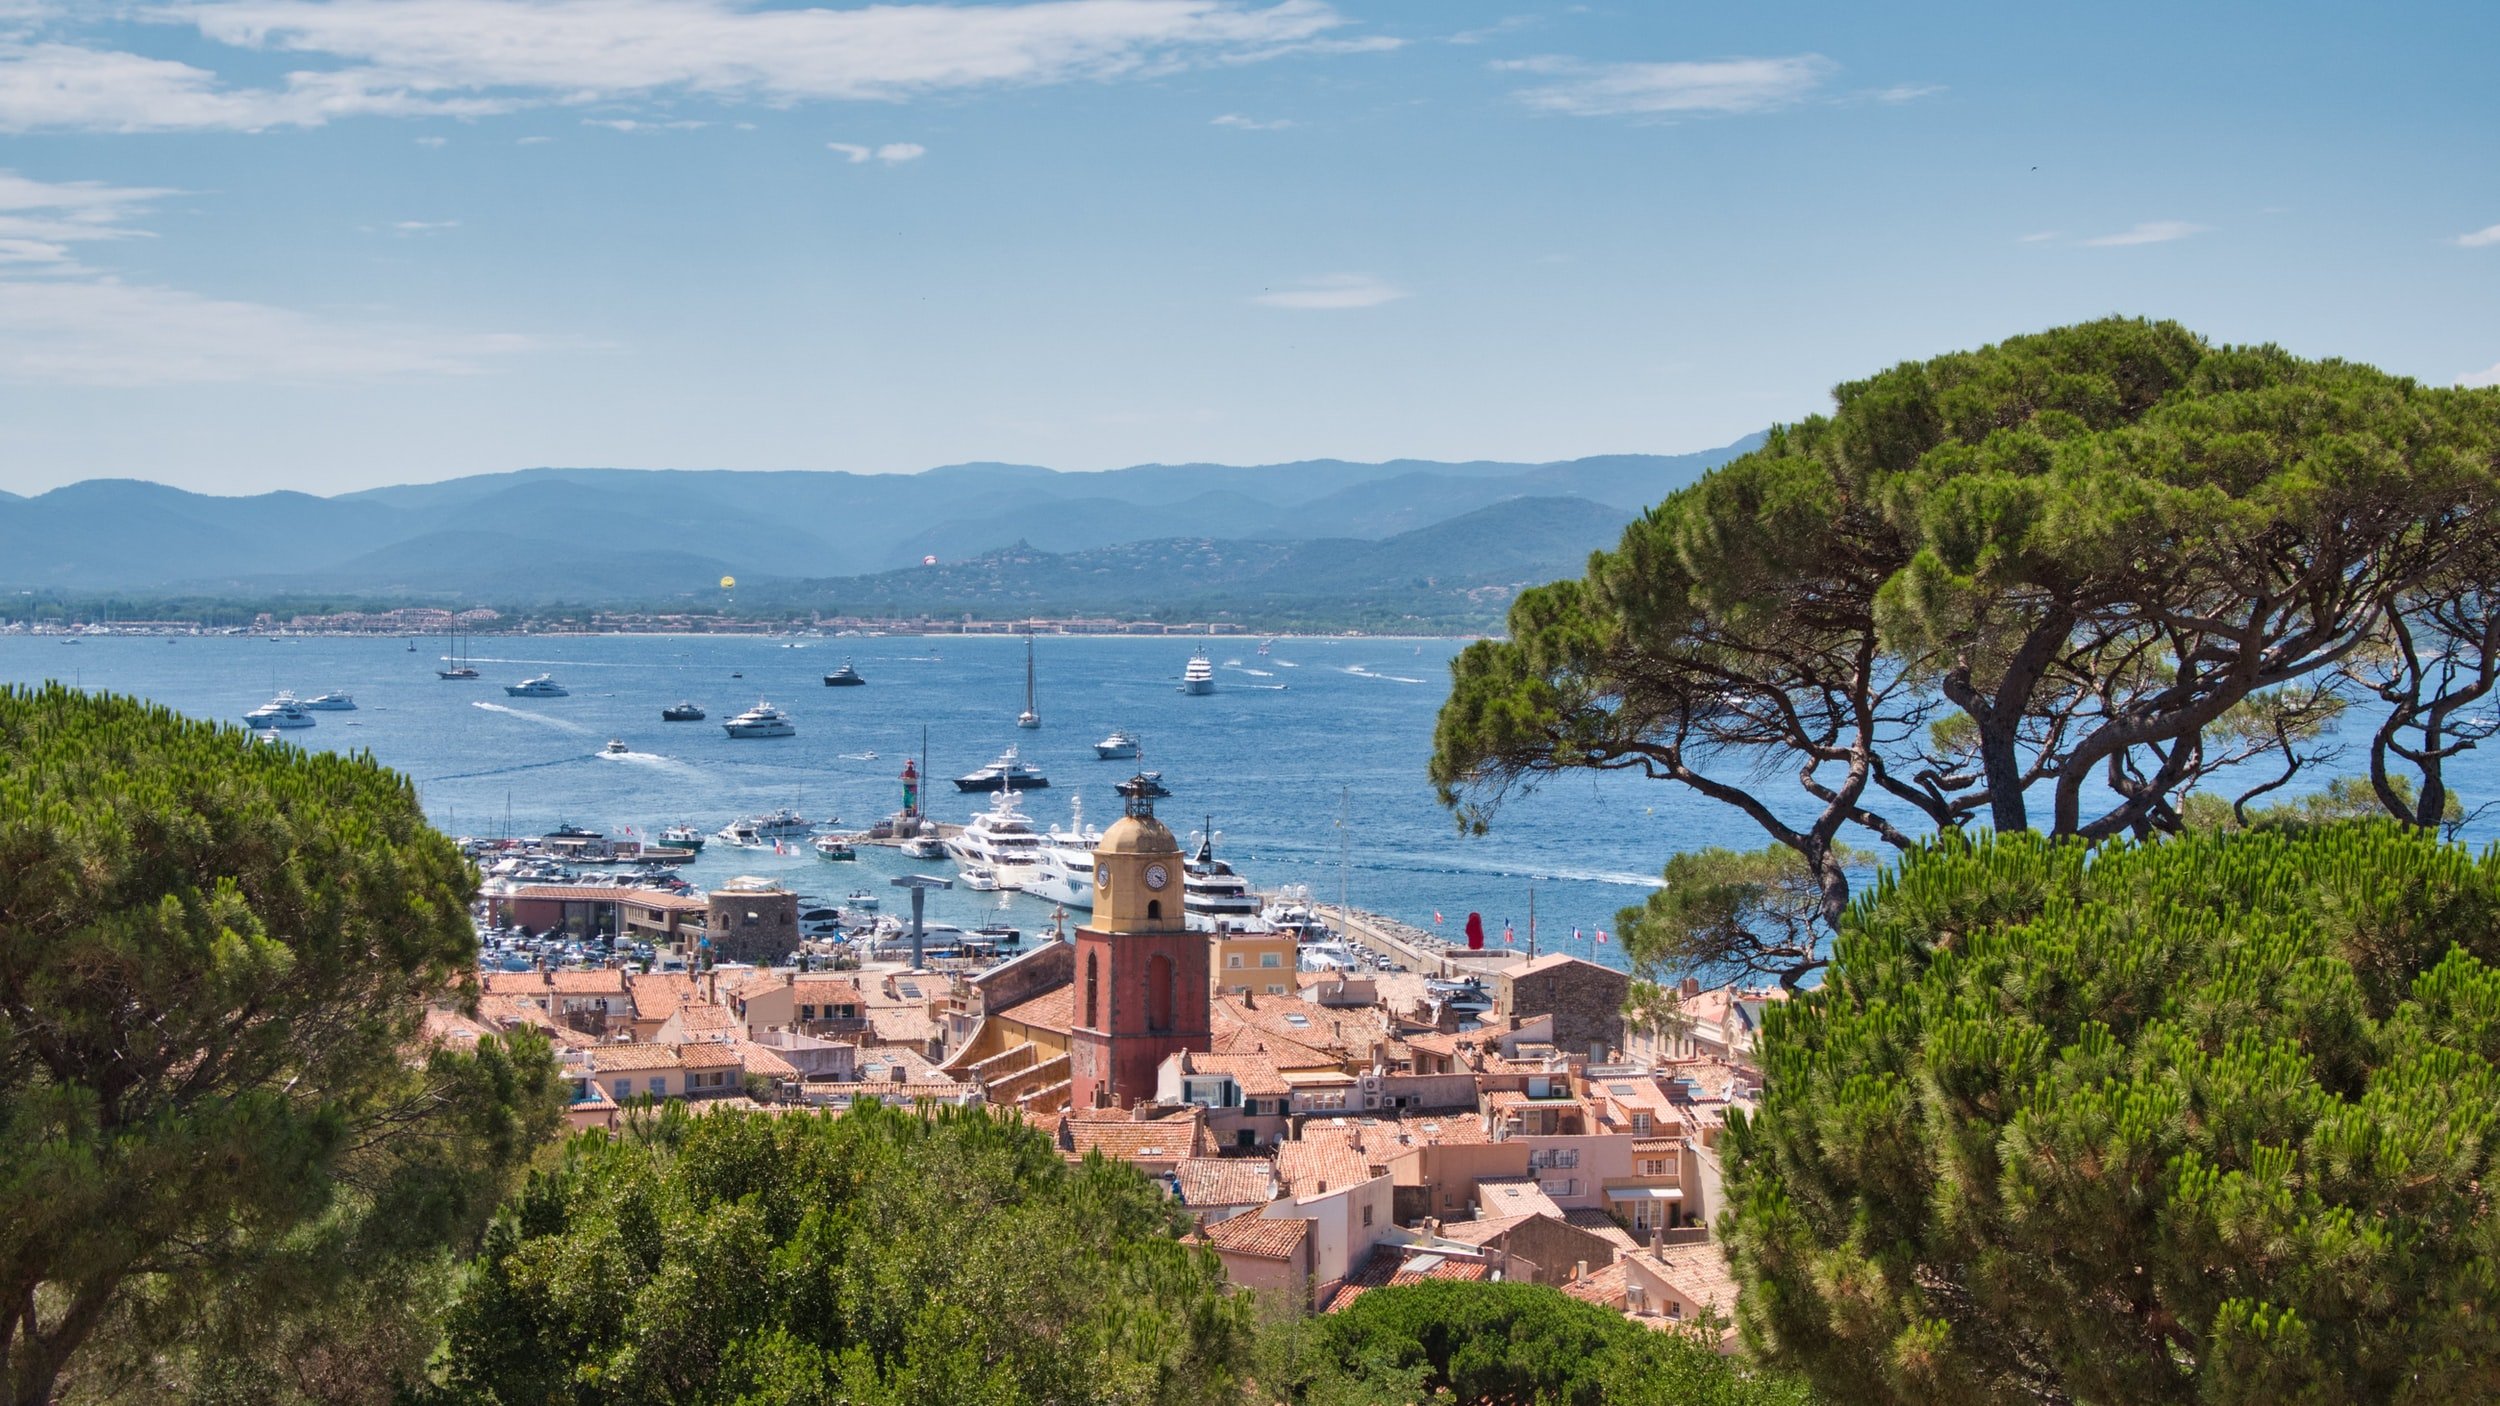 Exceptional villa and guided tour of Saint-Tropez on the Mediterranean coast